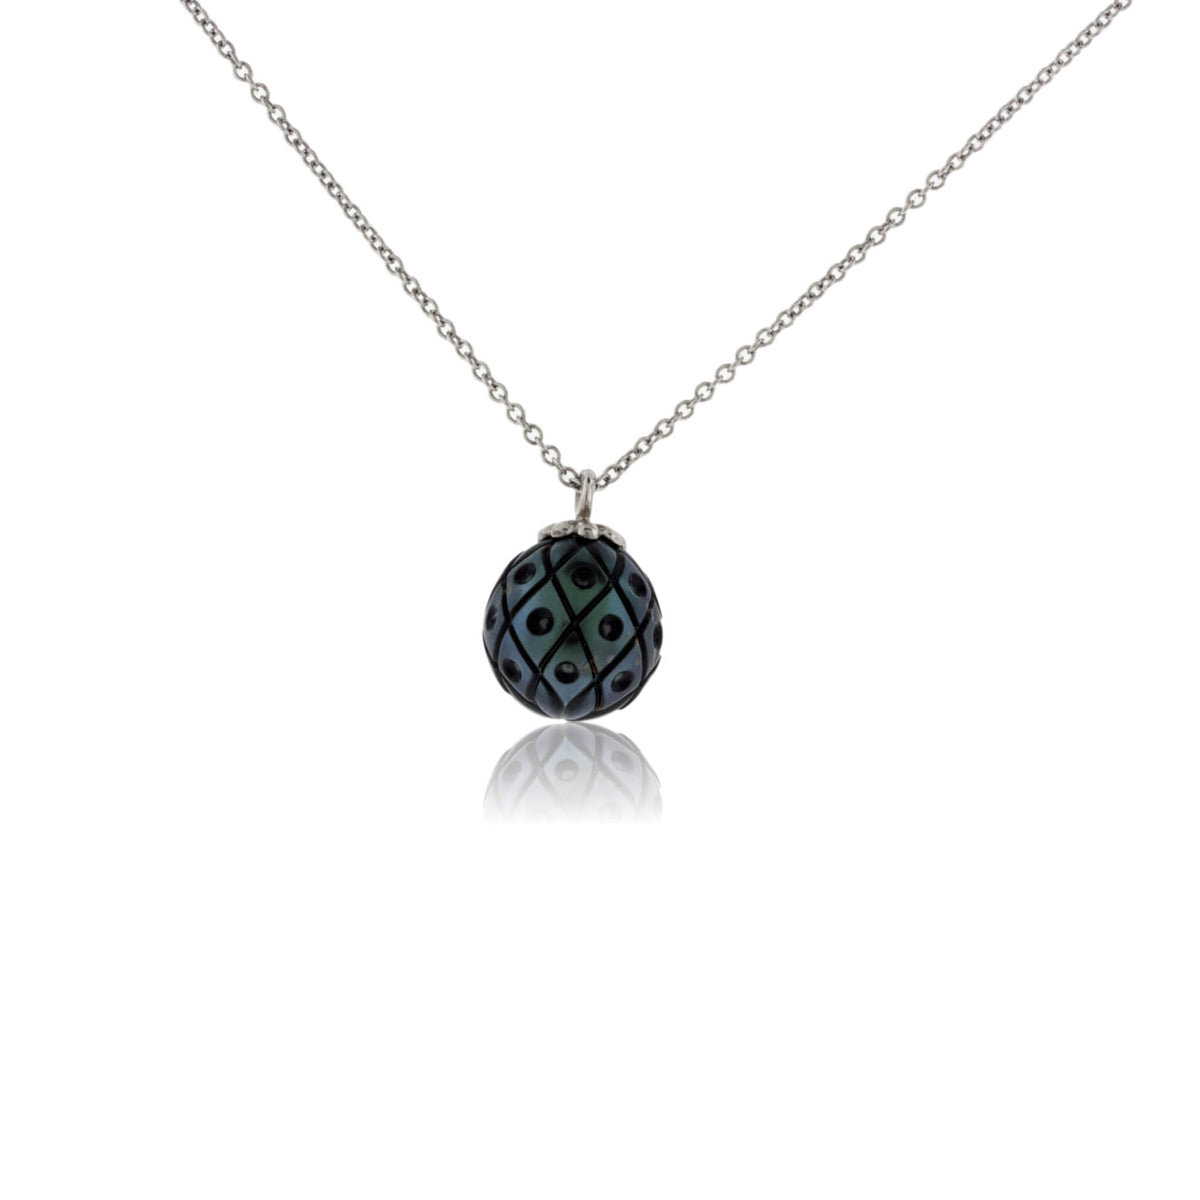 Harlequin Black Carved Pearl Pendant w/Chain - Park City Jewelers